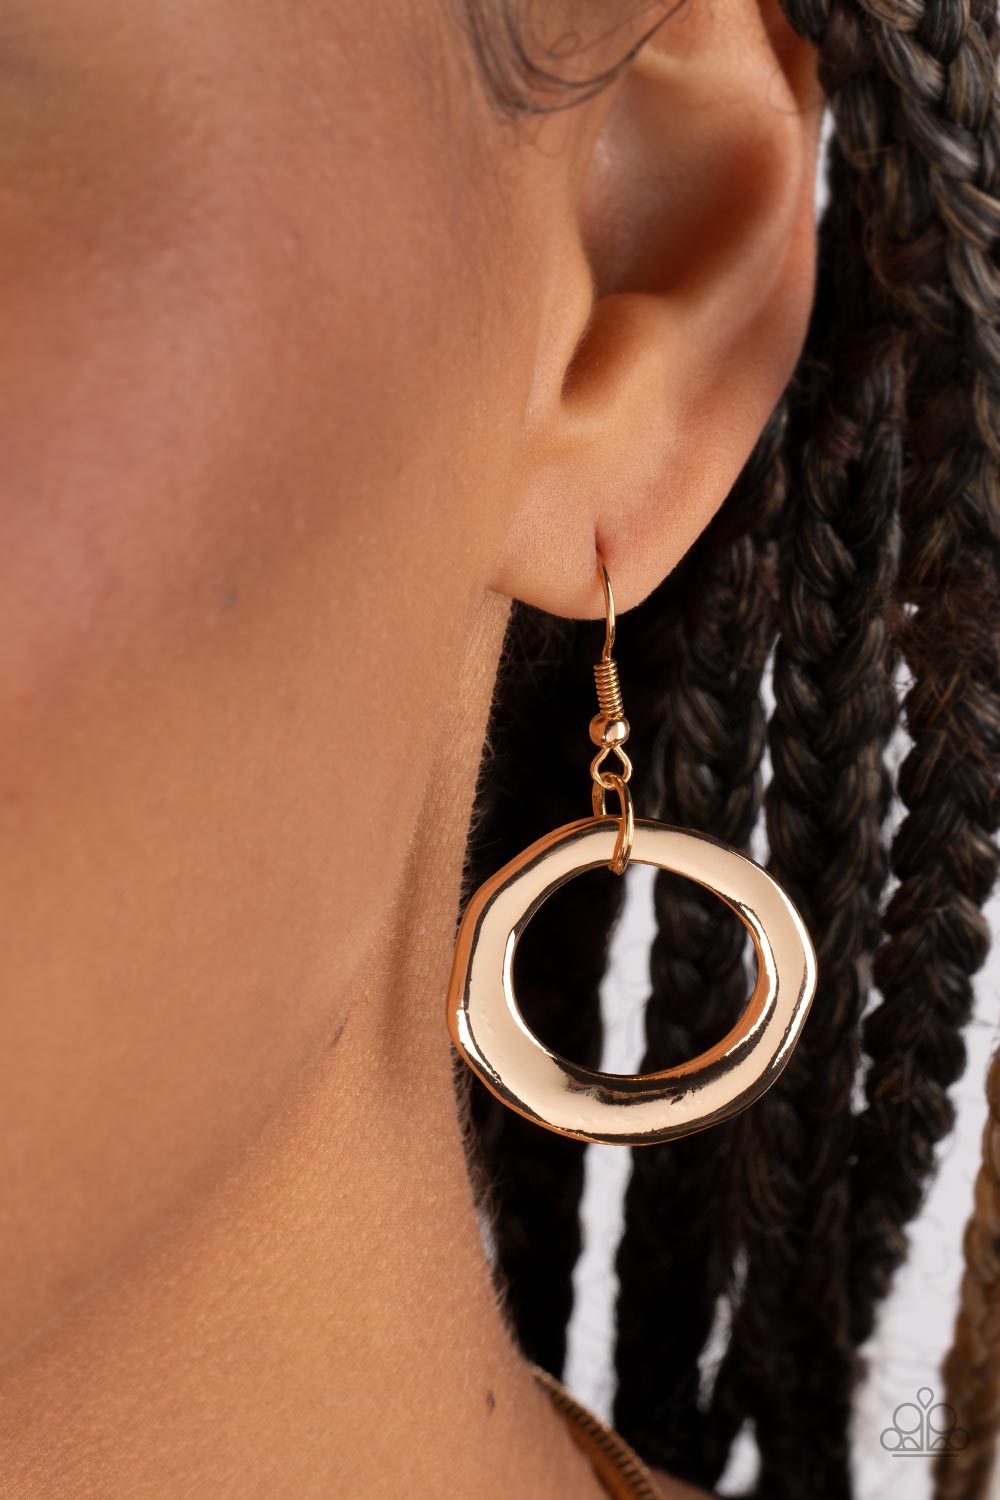 Forged in Fabulous - Gold Necklace - Paparazzi Accessories - Warped gold hoops glisten from the bottom of a bowing gold bar set in the center of a rounded gold snake chain, resulting in a contemporary centerpiece below the collar. Features an adjustable clasp closure.